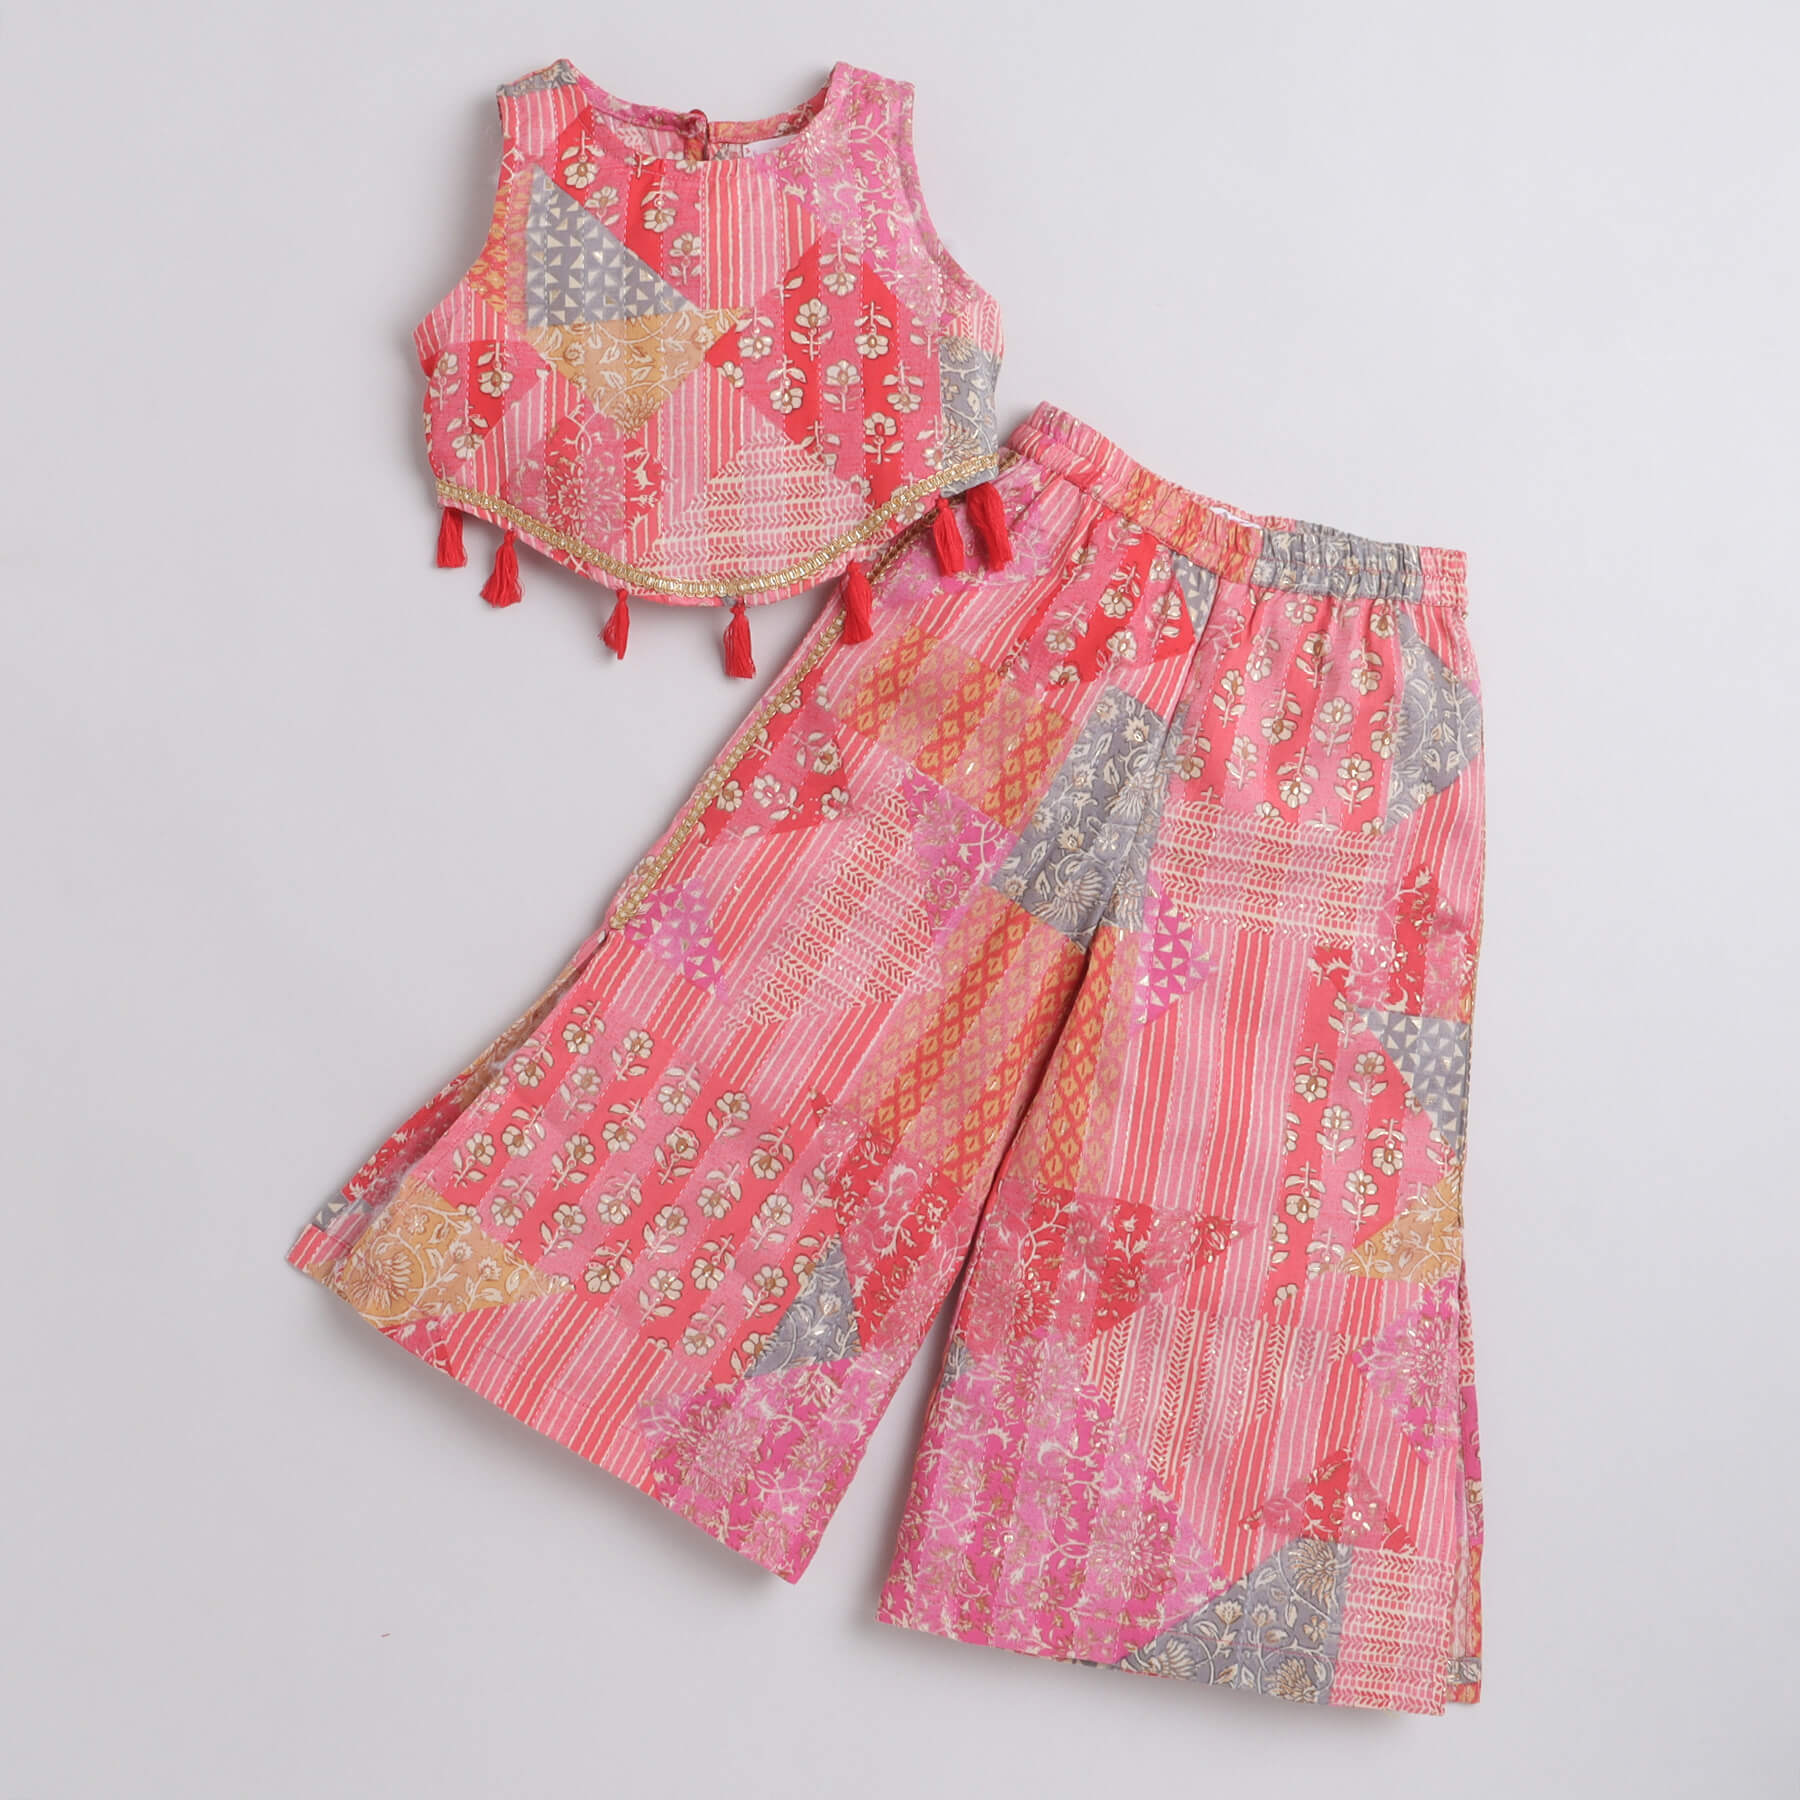 Taffykids 100% cotton patchwork printed ethnic crop top and slit pant set-Multi